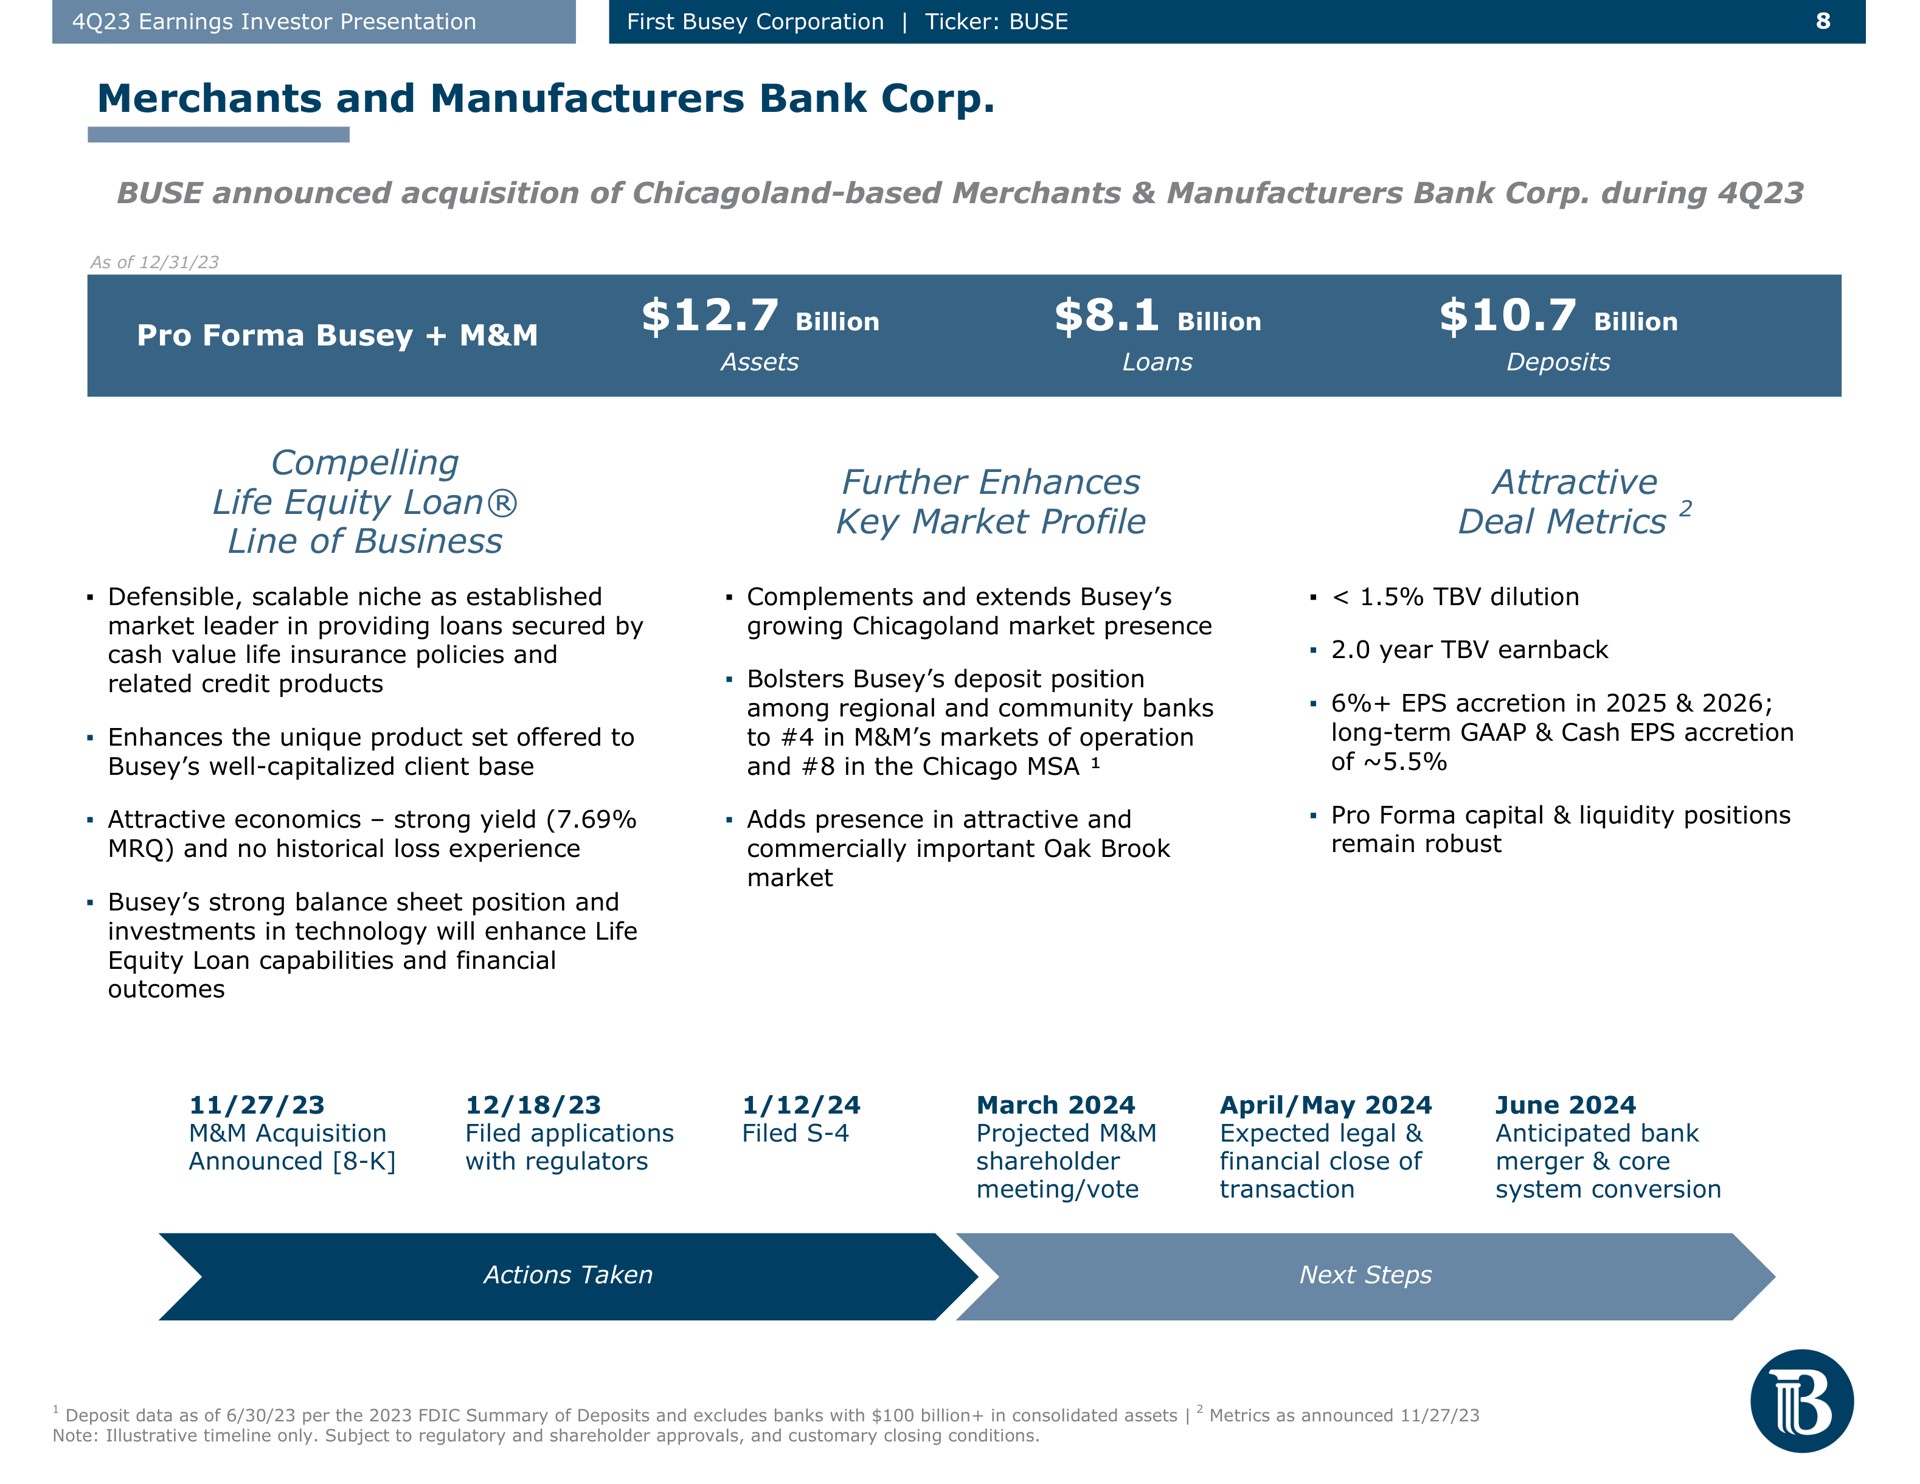 merchants and manufacturers bank corp announced acquisition of based merchants manufacturers bank corp during pro compelling life equity loan line of business further enhances key market profile attractive deal metrics pis billion cash value insurance policies the unique product set offered to well capitalized client base among regional community banks to in markets operation in the year accretion in long term cash accretion economics strong yield adds presence in capital liquidity positions march may june | First Busey